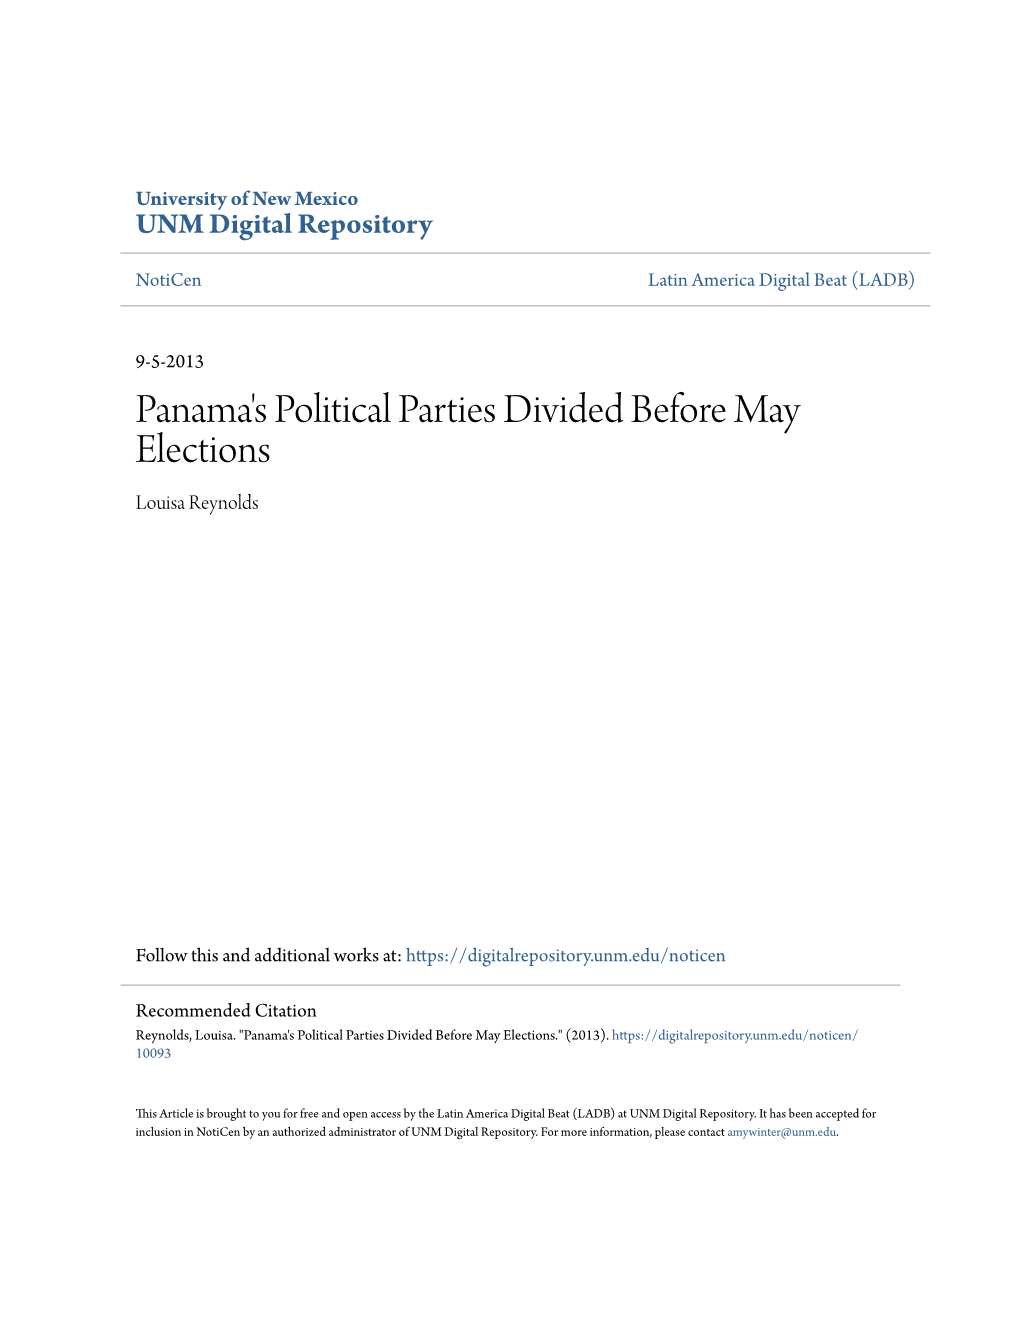 Panama's Political Parties Divided Before May Elections Louisa Reynolds